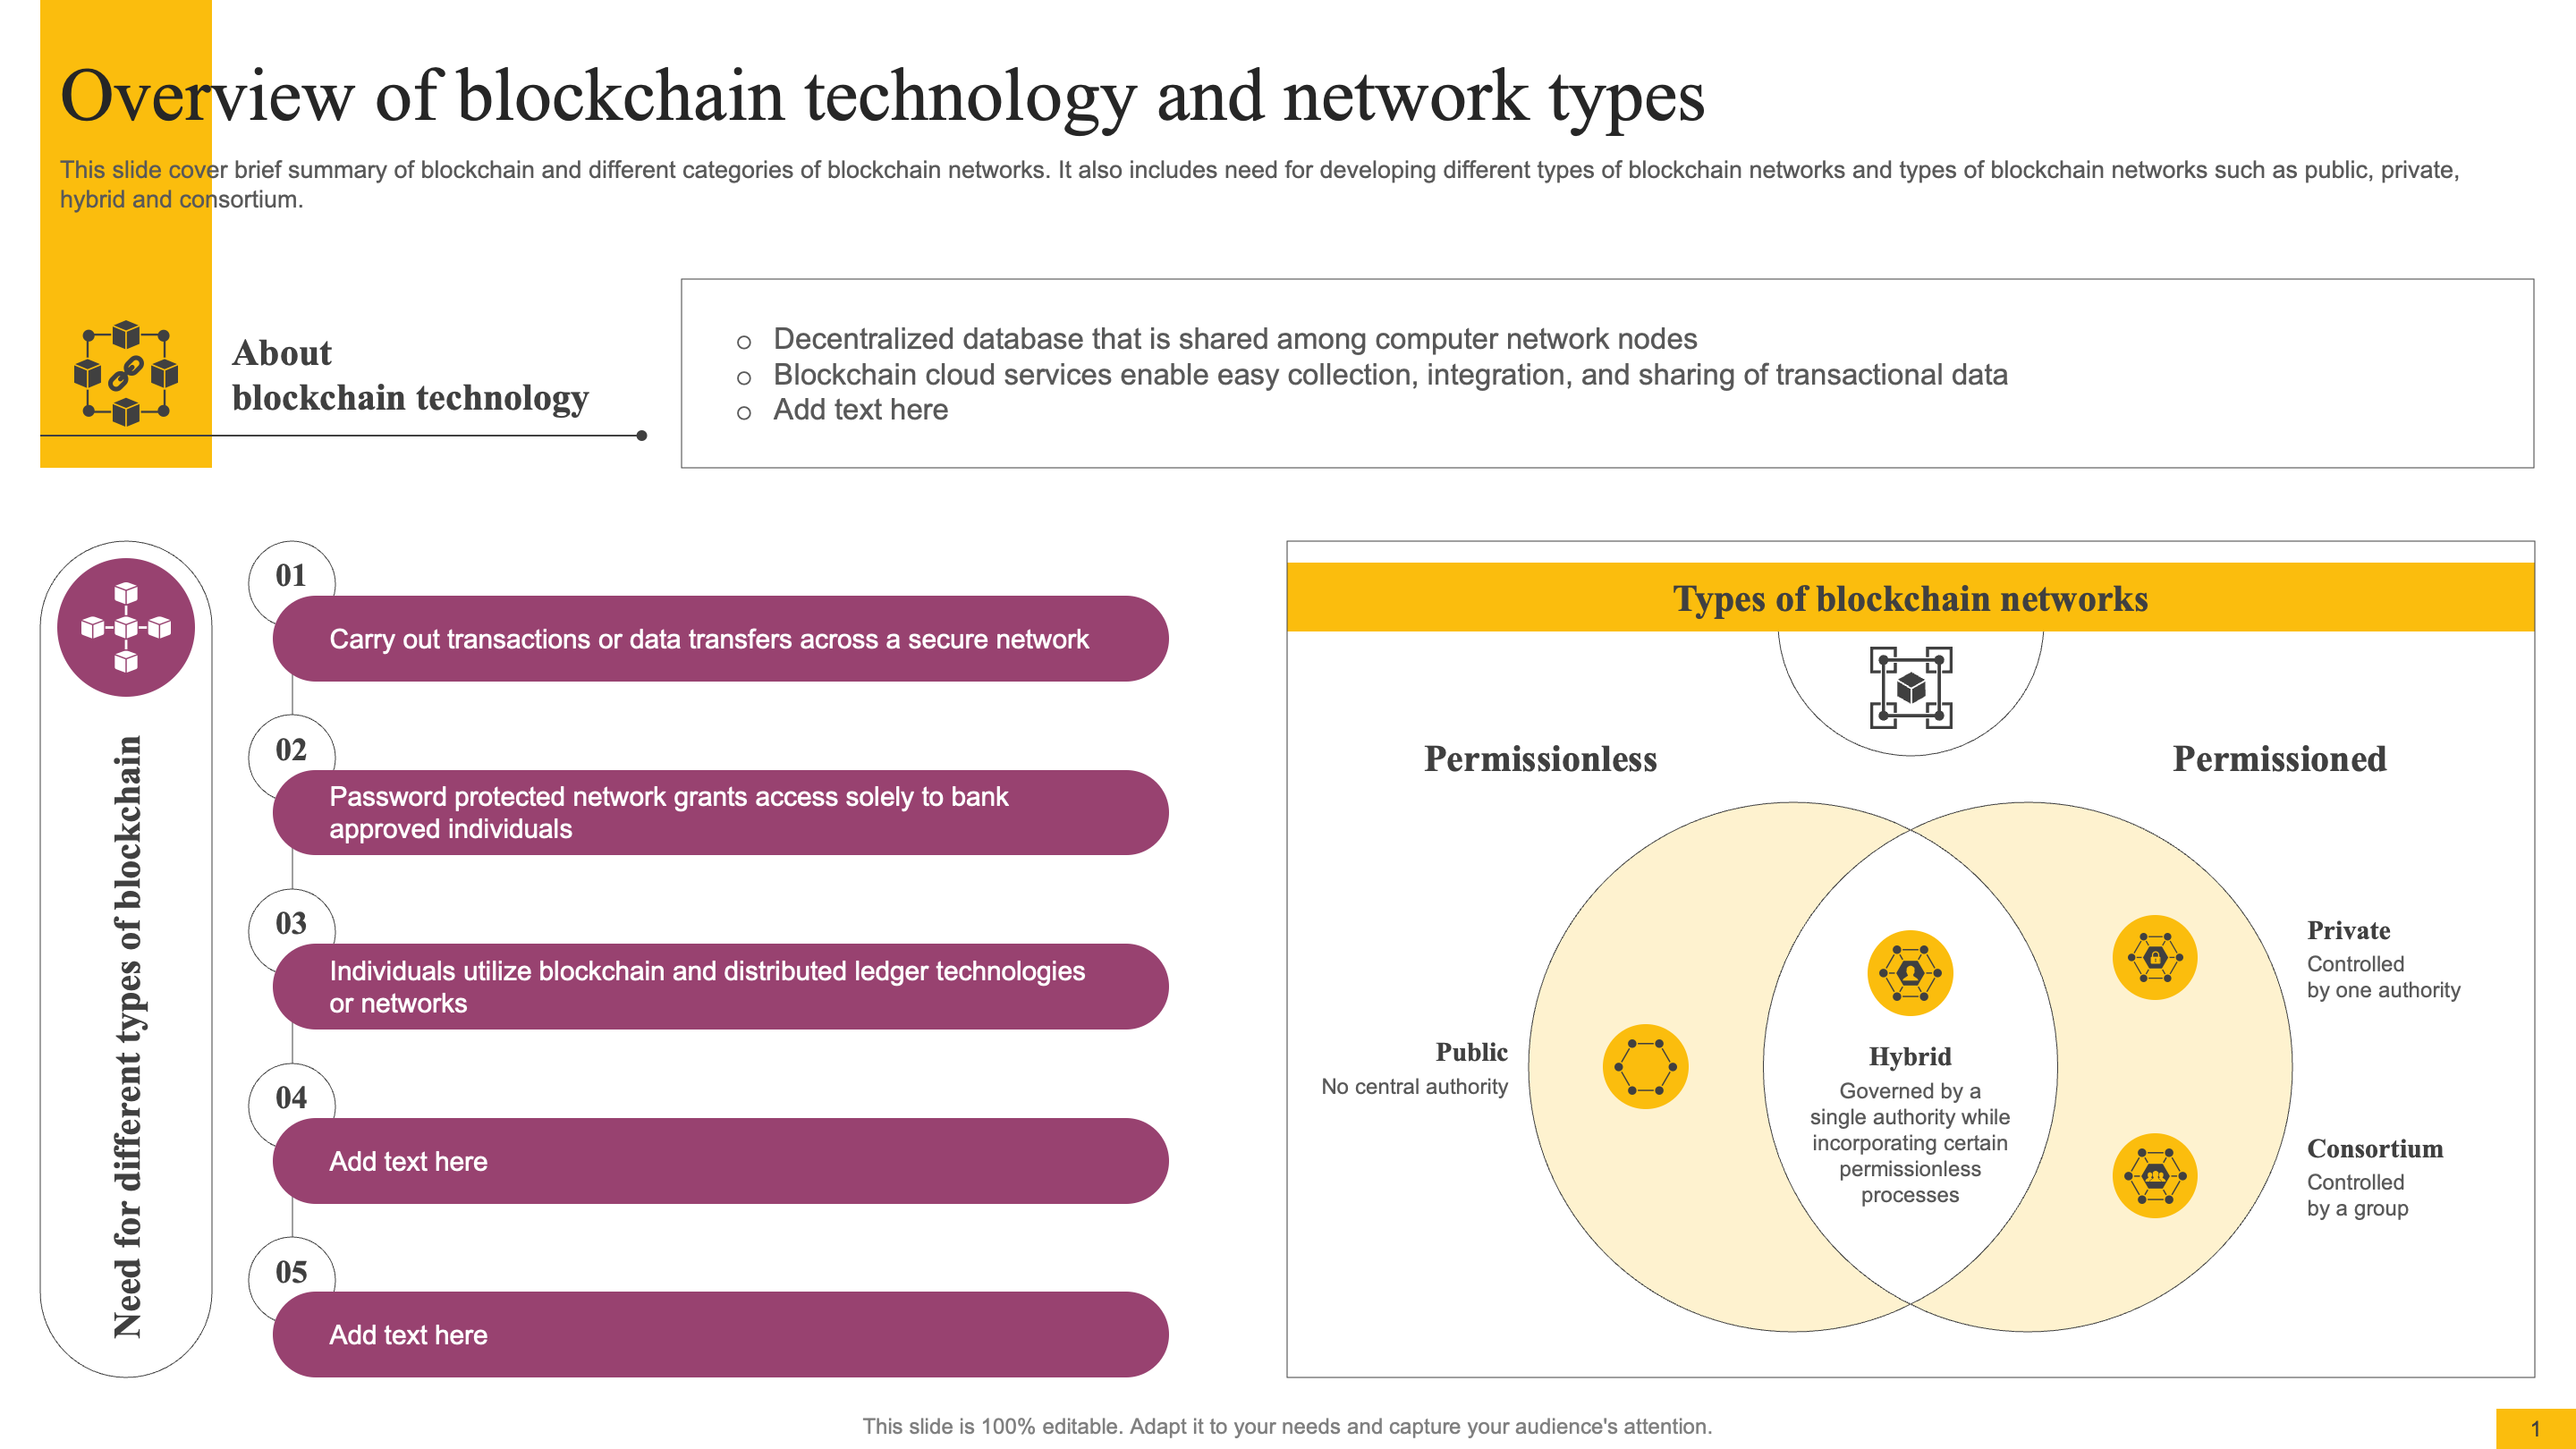 Overview of blockchain technology and network types